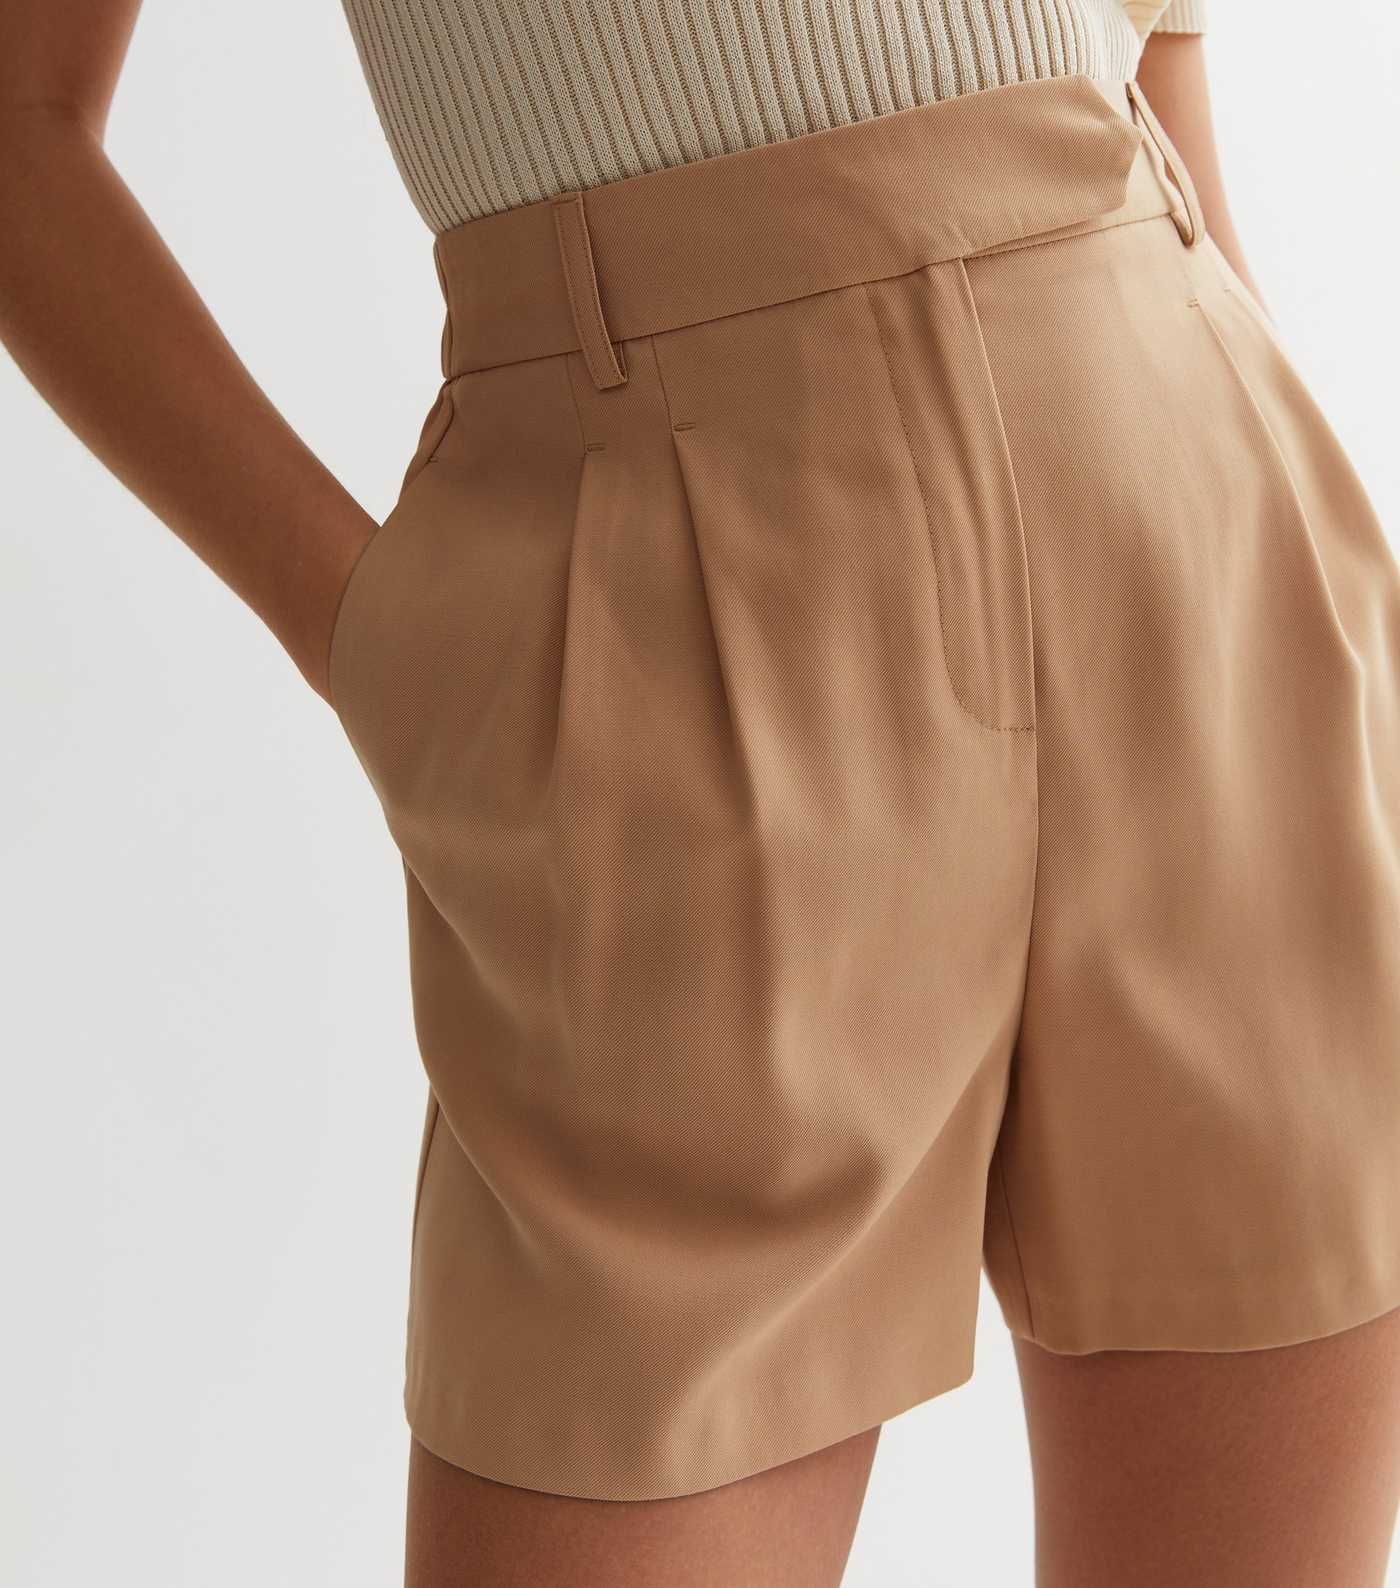 Camel High Waist Tailored Shorts
						
						Add to Saved Items
						Remove from Saved Items | New Look (UK)